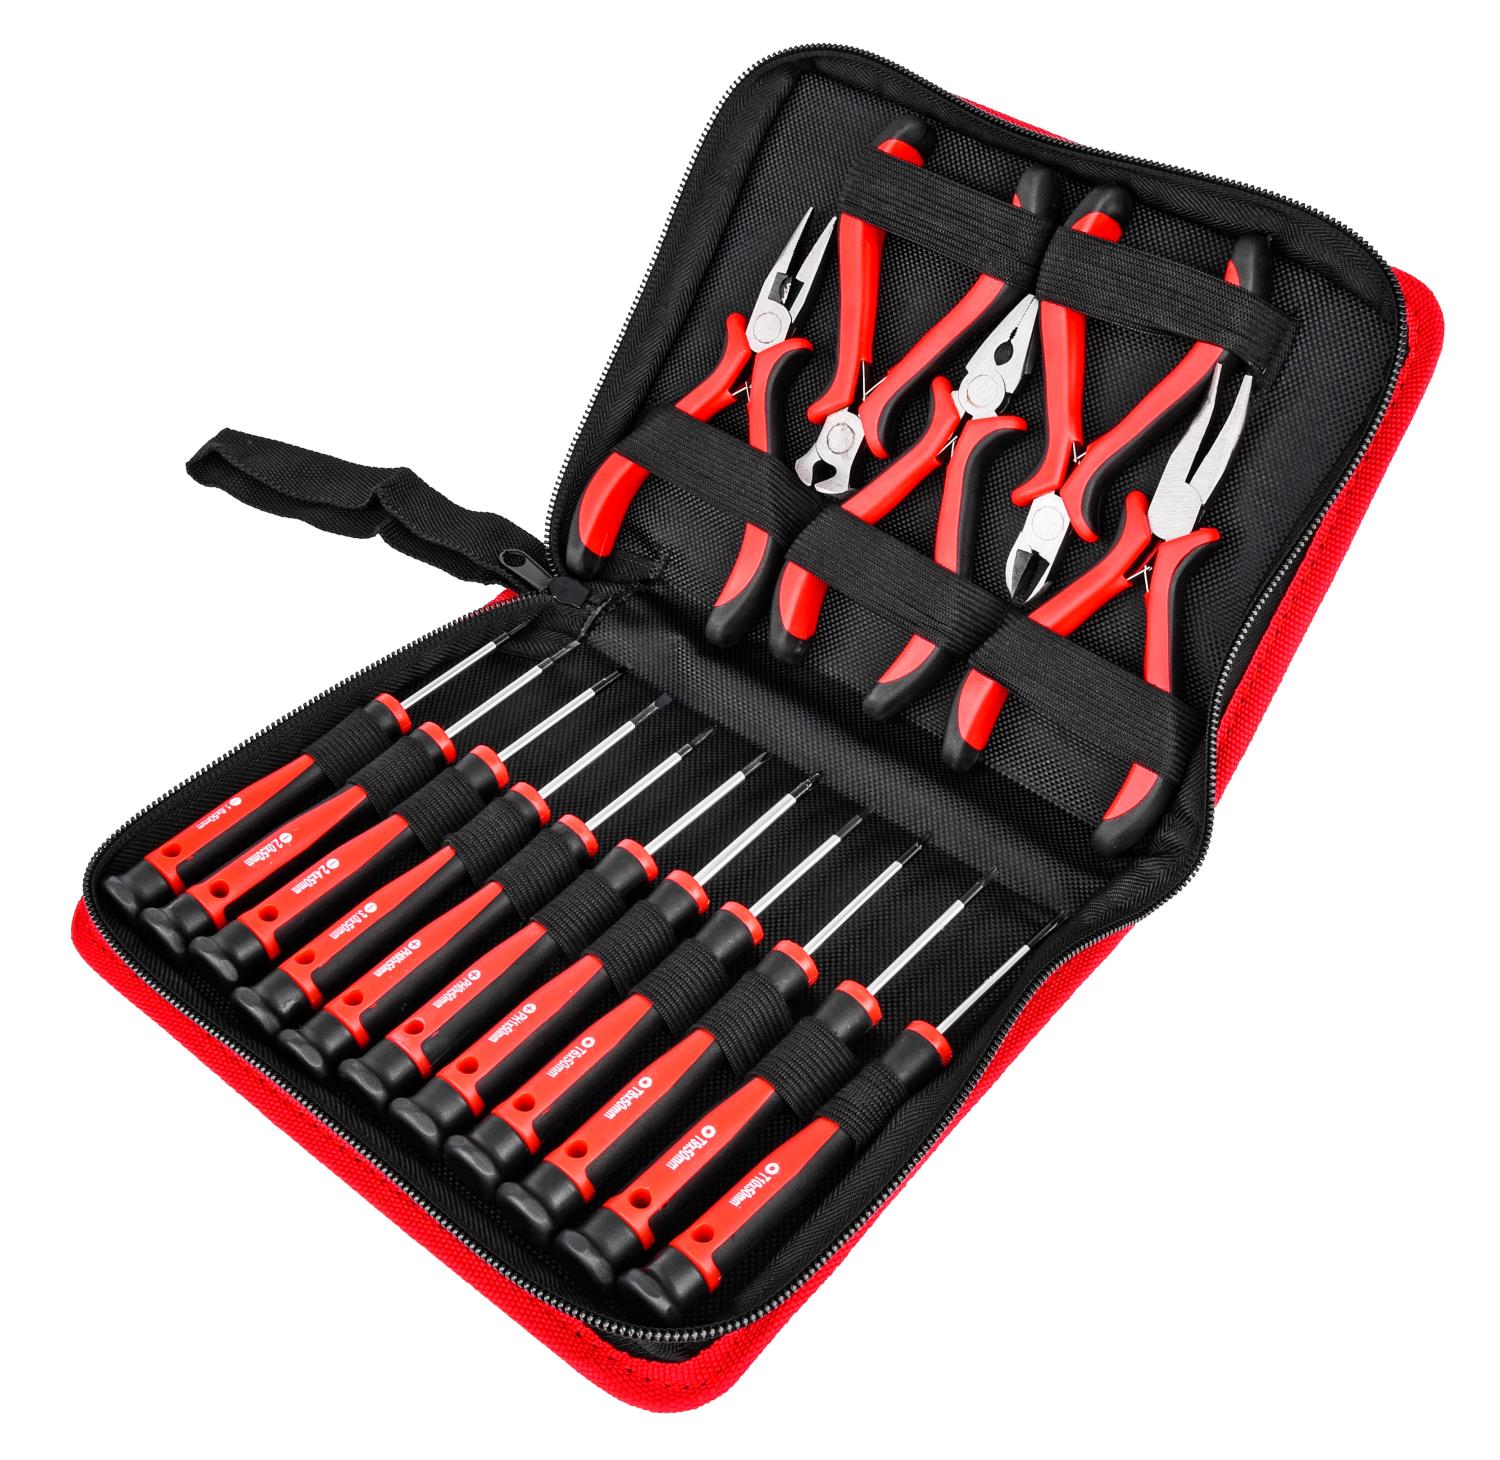 16-Piece Pliers & Precision Screwdrivers Tool Set with Carry Case